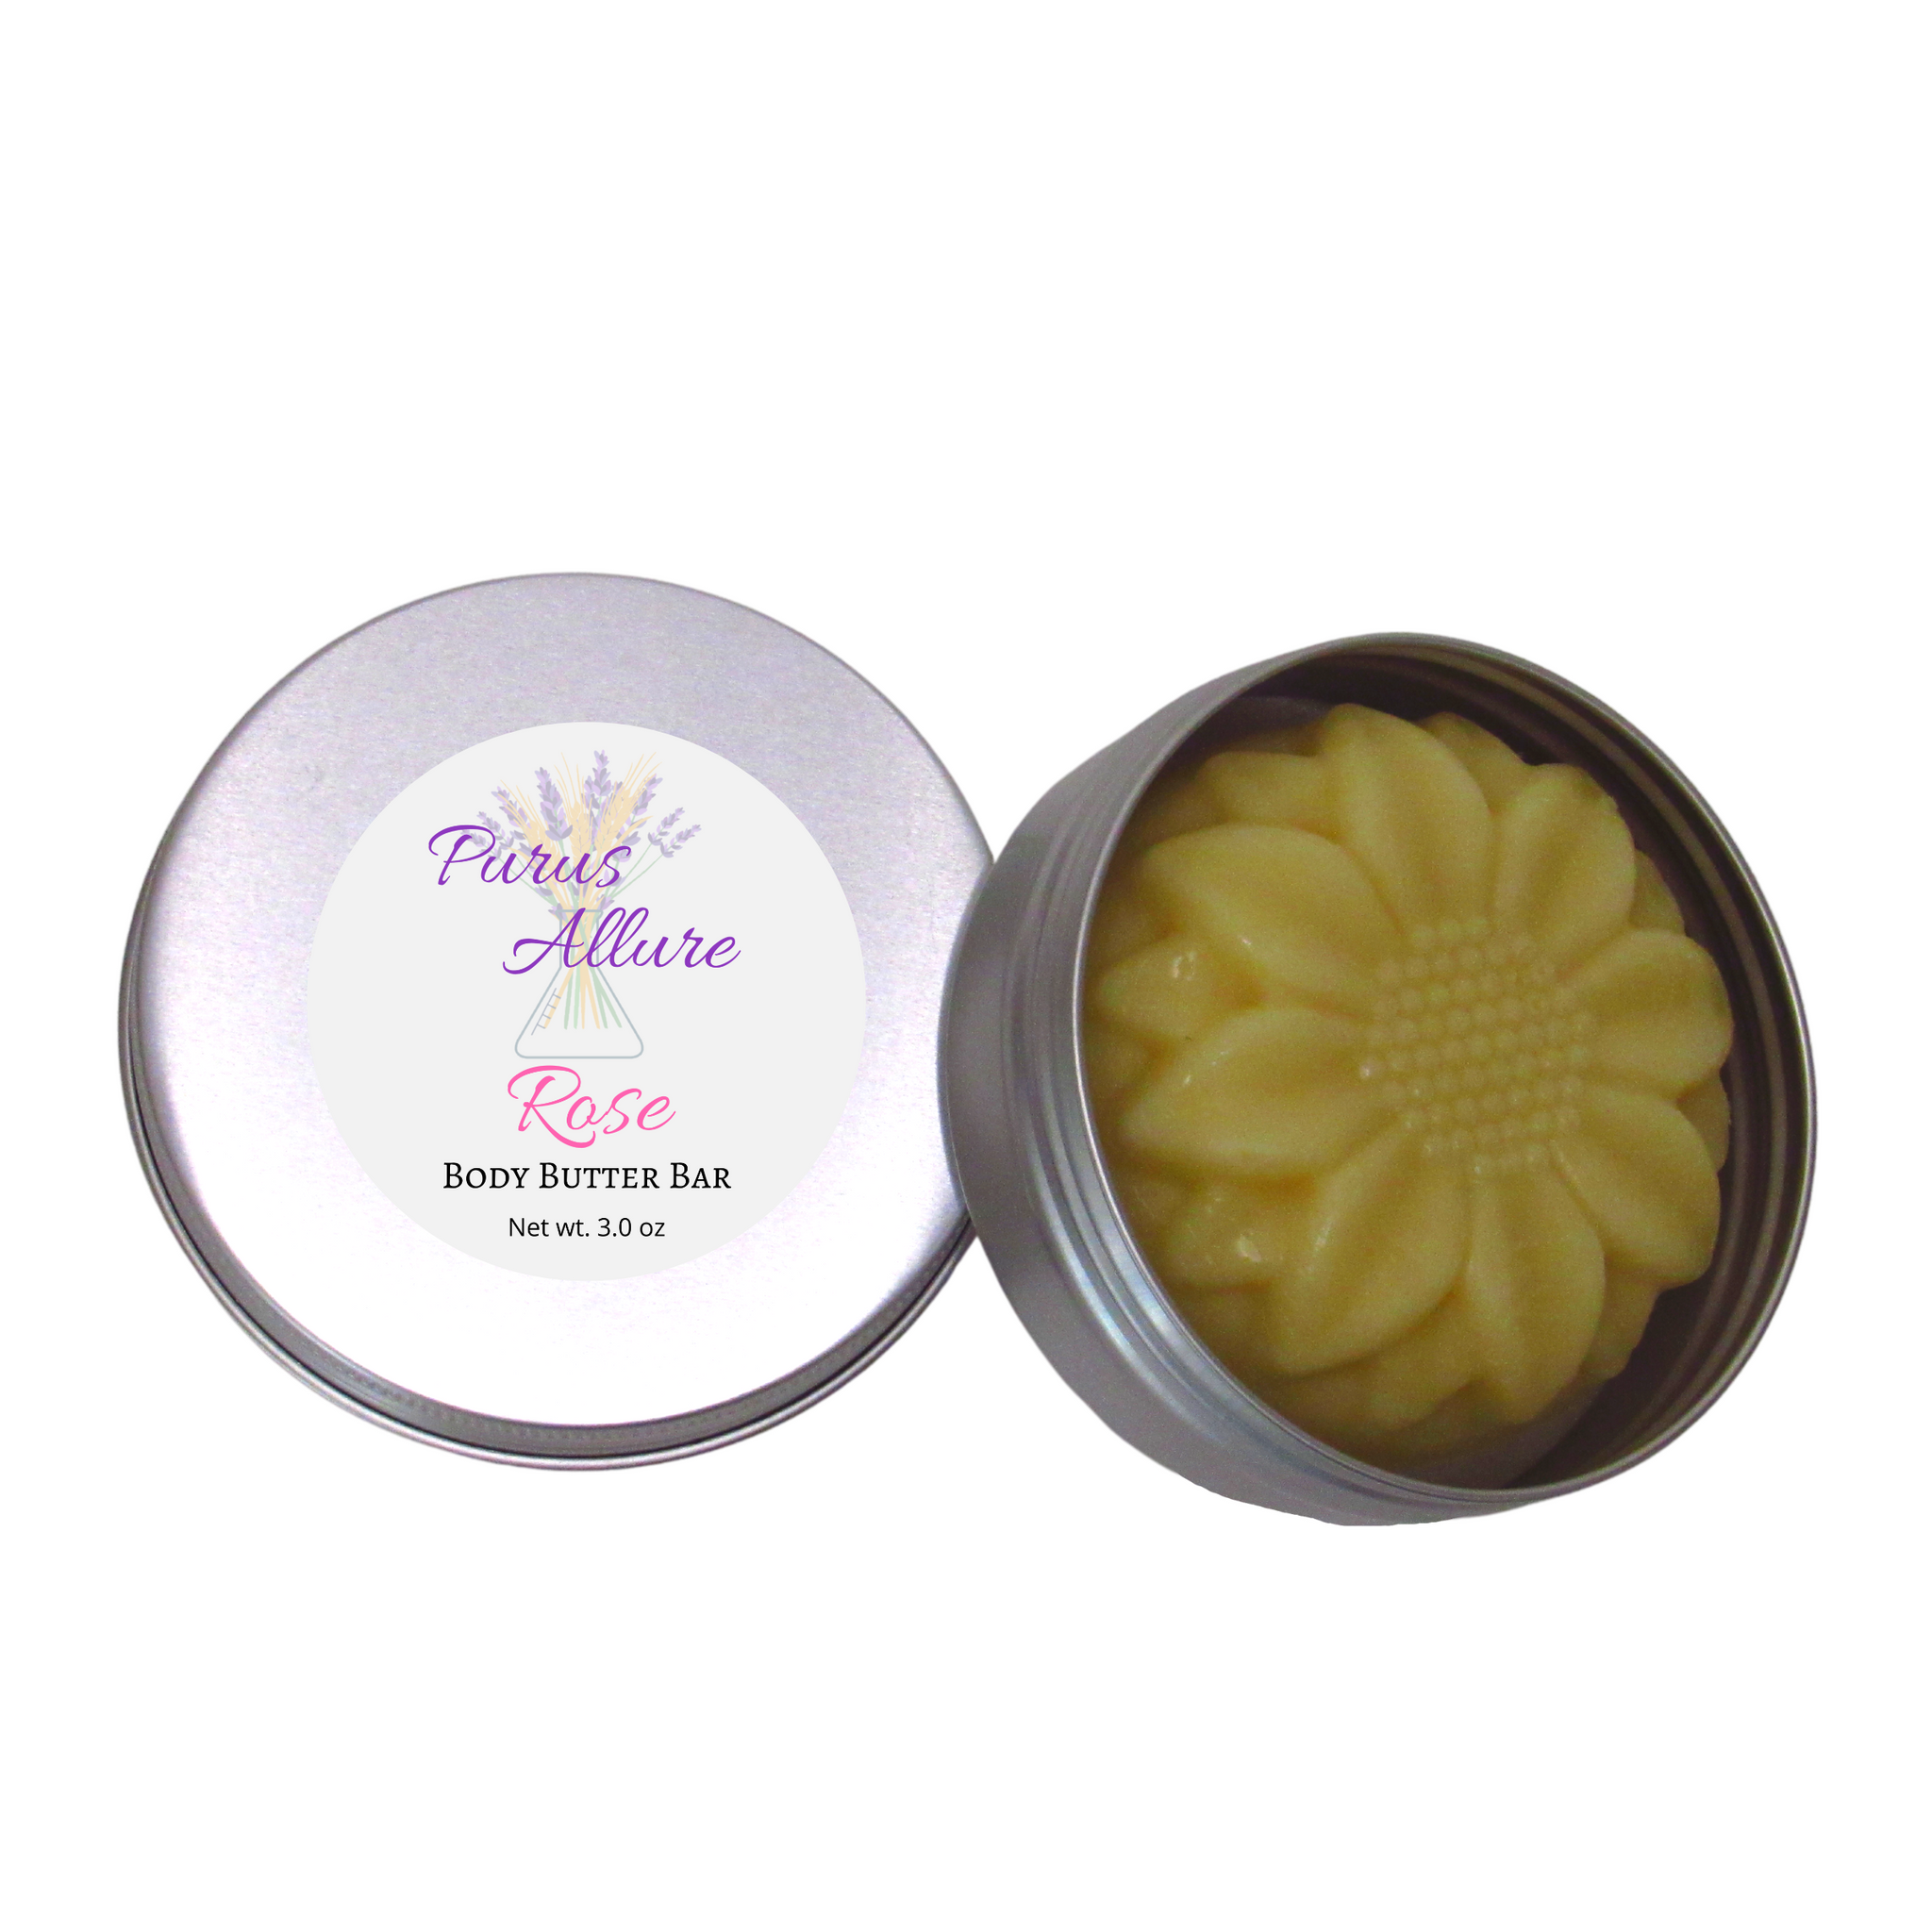 WS Natural Body Butter Bars In Tin - 3.0 oz - Multiple Scents